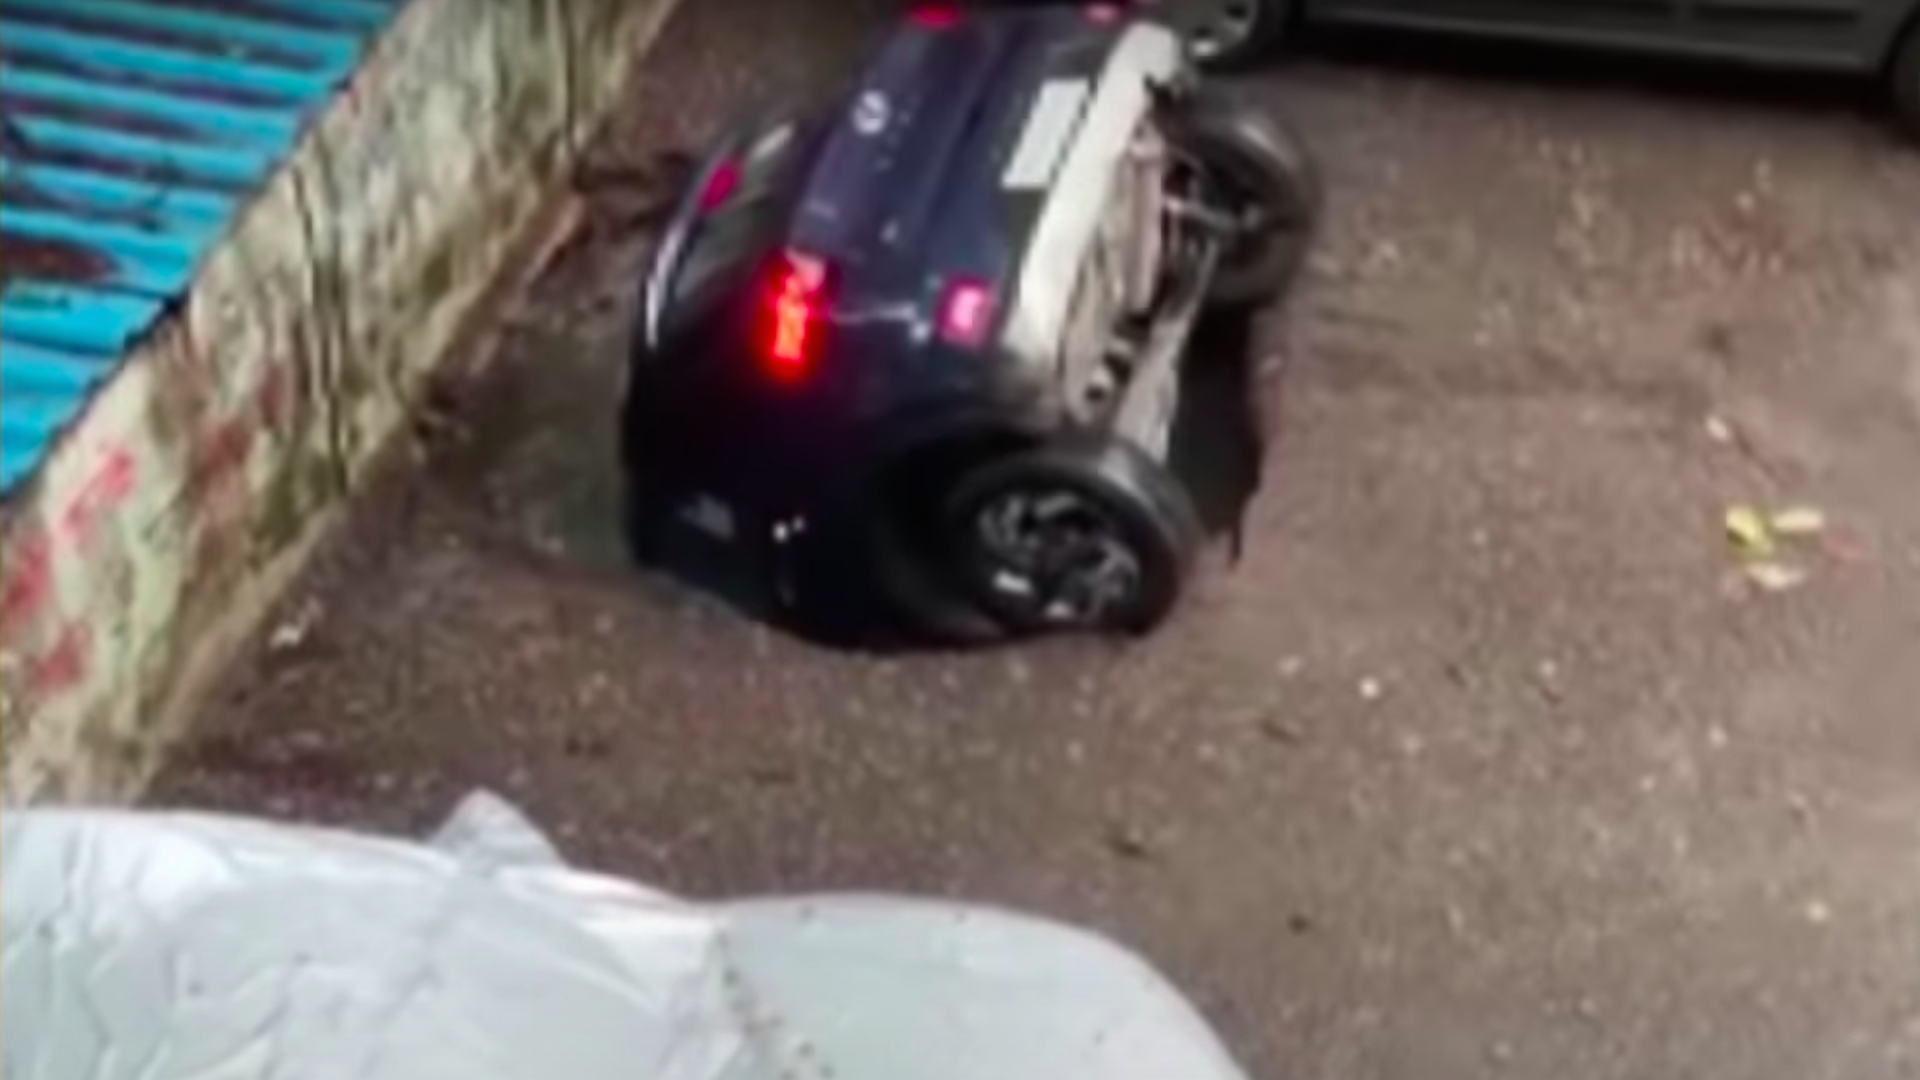 Video Shows Car Being Swallowed Up By Sinkhole After Heavy Rain in Mumbai